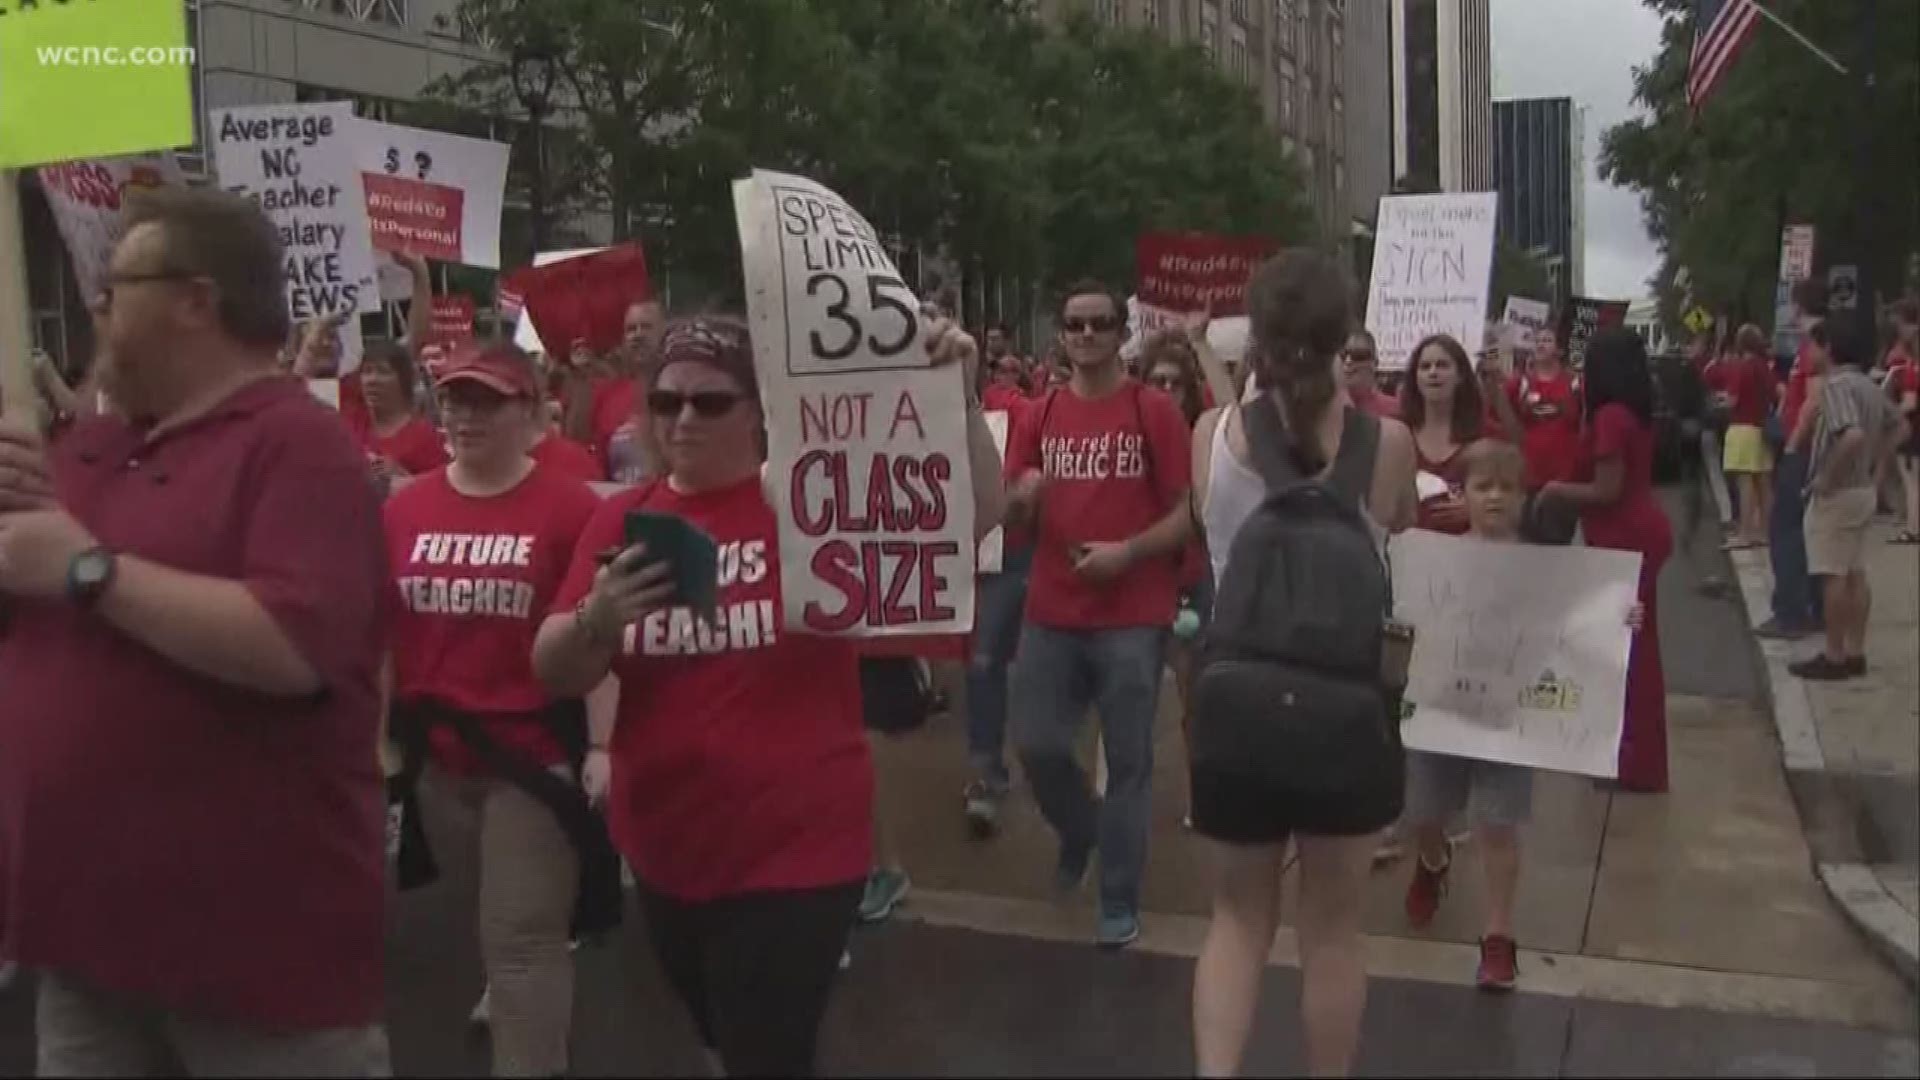 Thousands of North Carolina teachers are rallying outside the North Carolina General Assembly, demanding better pay and working conditions in classrooms across the state.